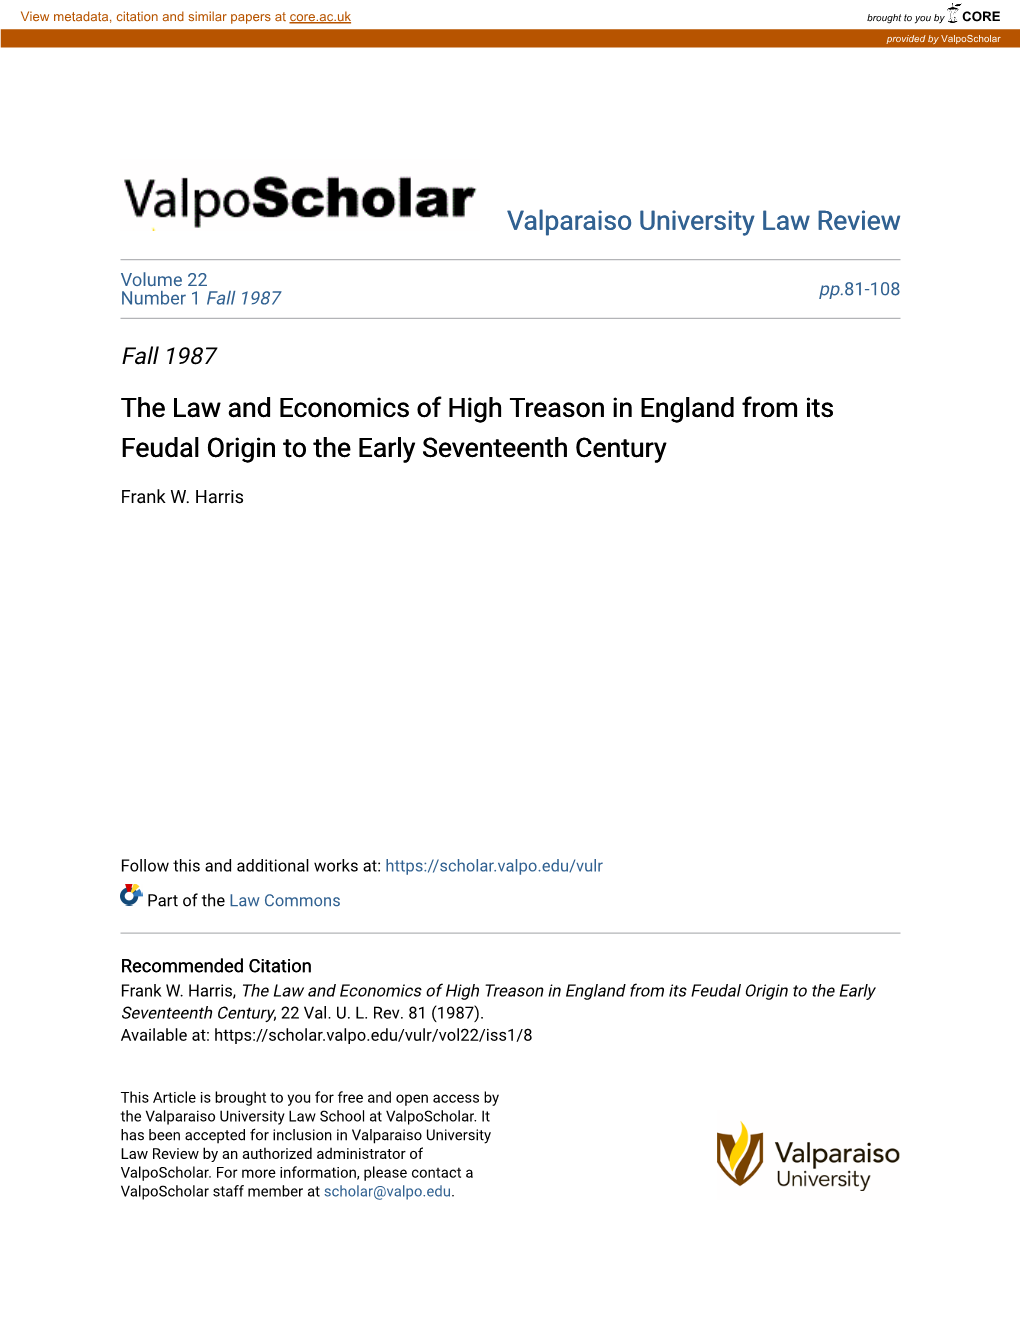 The Law and Economics of High Treason in England from Its Feudal Origin to the Early Seventeenth Century